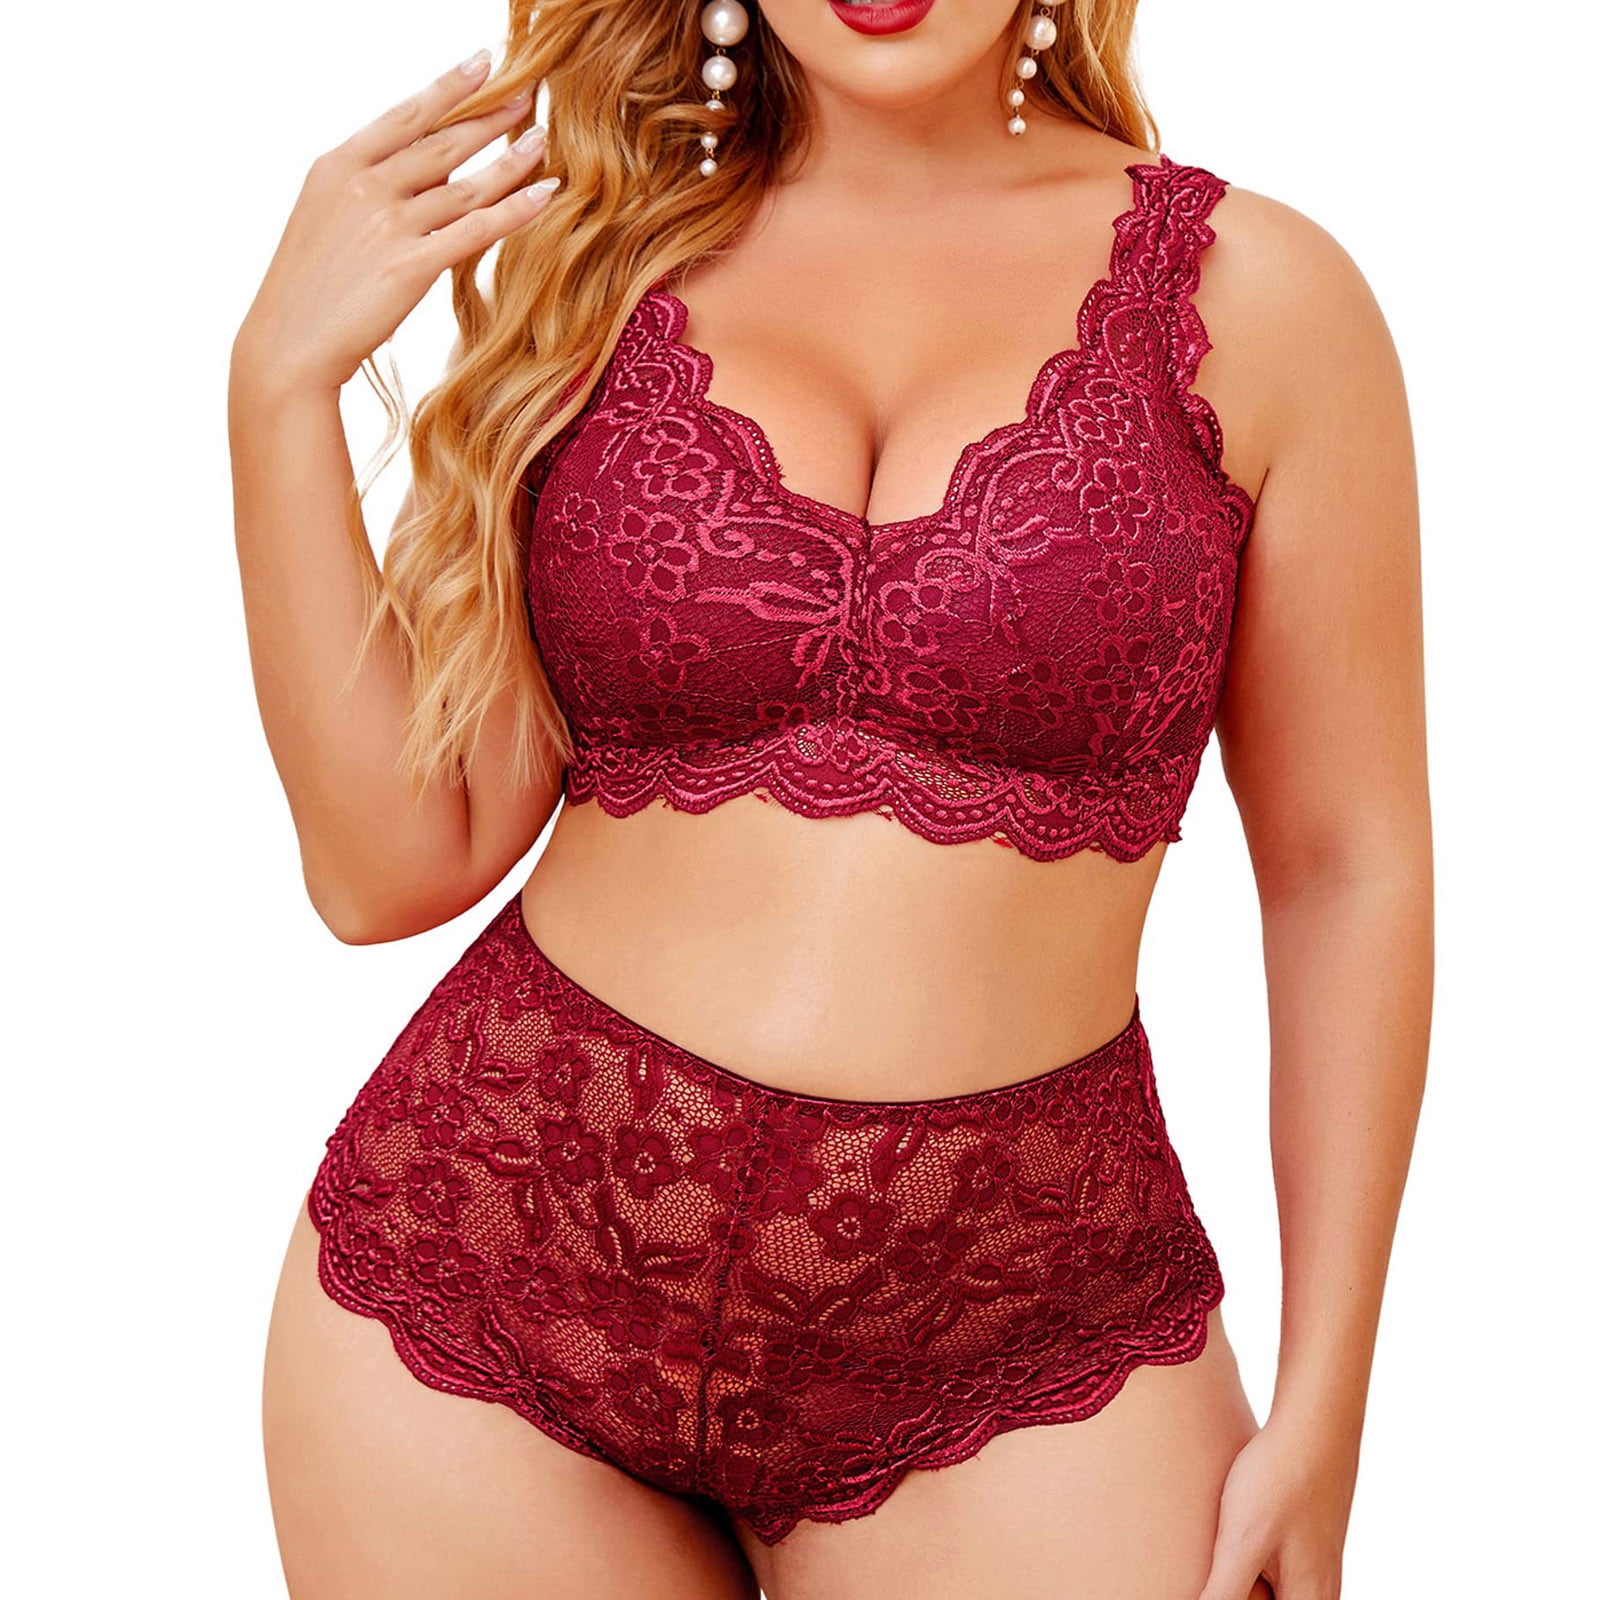 Vedolay Matching Bra And Panty Sets Plus Size 2 Piece Lingerie for Women  Strappy Bra and Panty Underwear Sets Lace Underwear Set for Women(Wine,4XL)